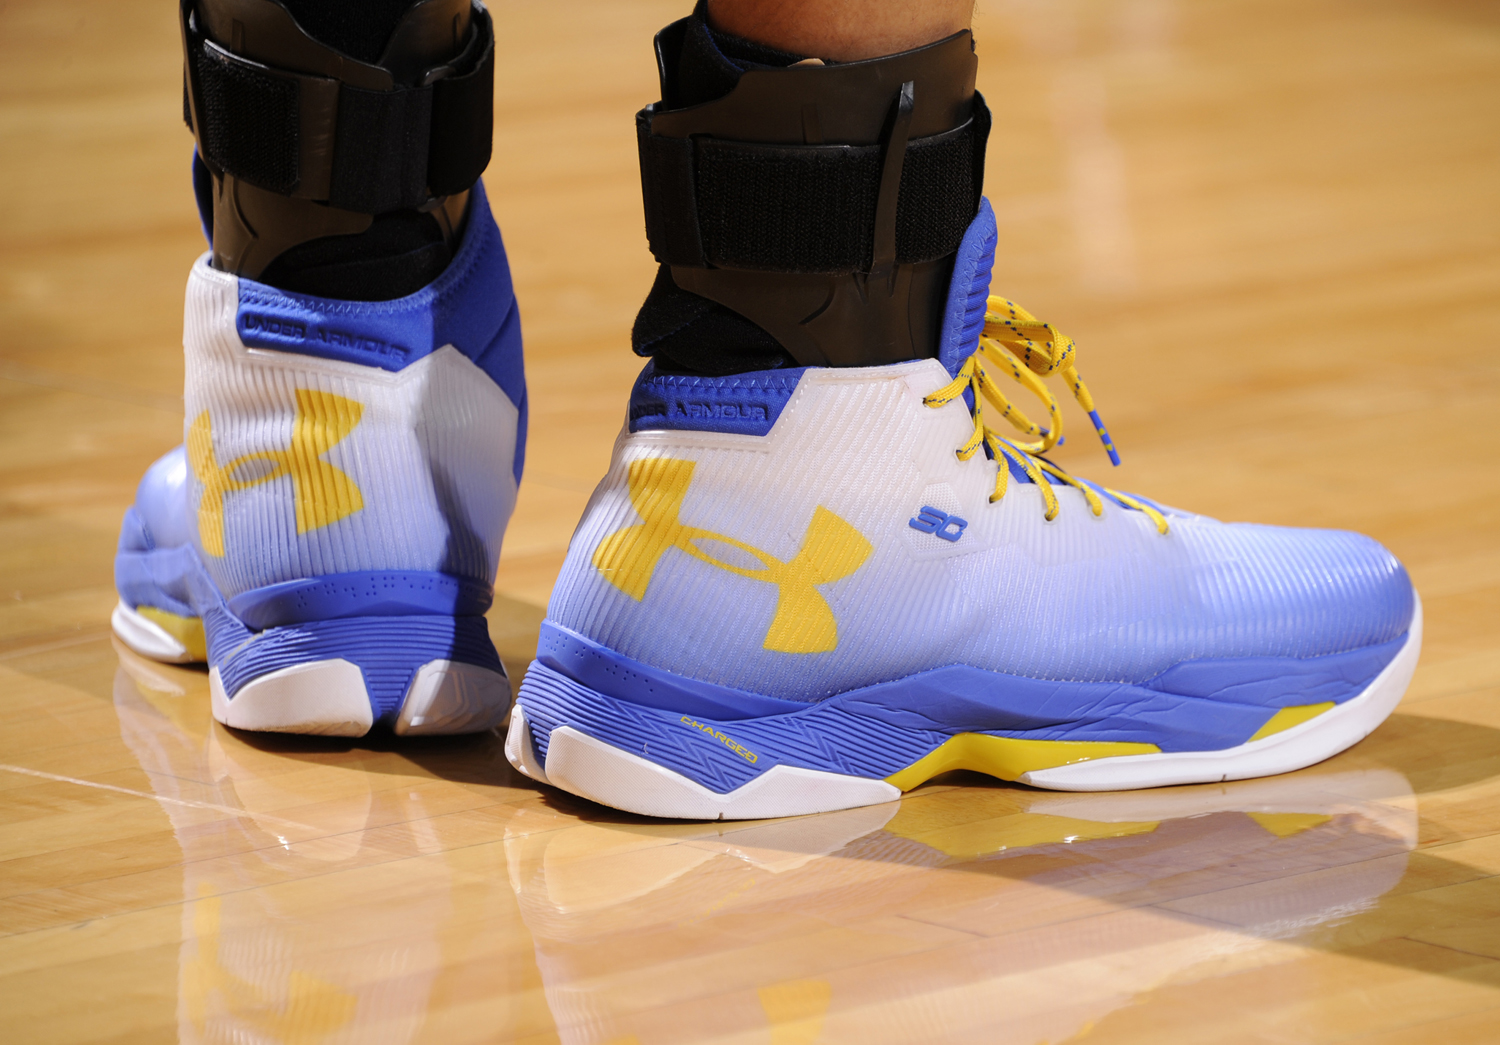 Steph Curry's New Shoes Got ROASTED BY THE INTERNET